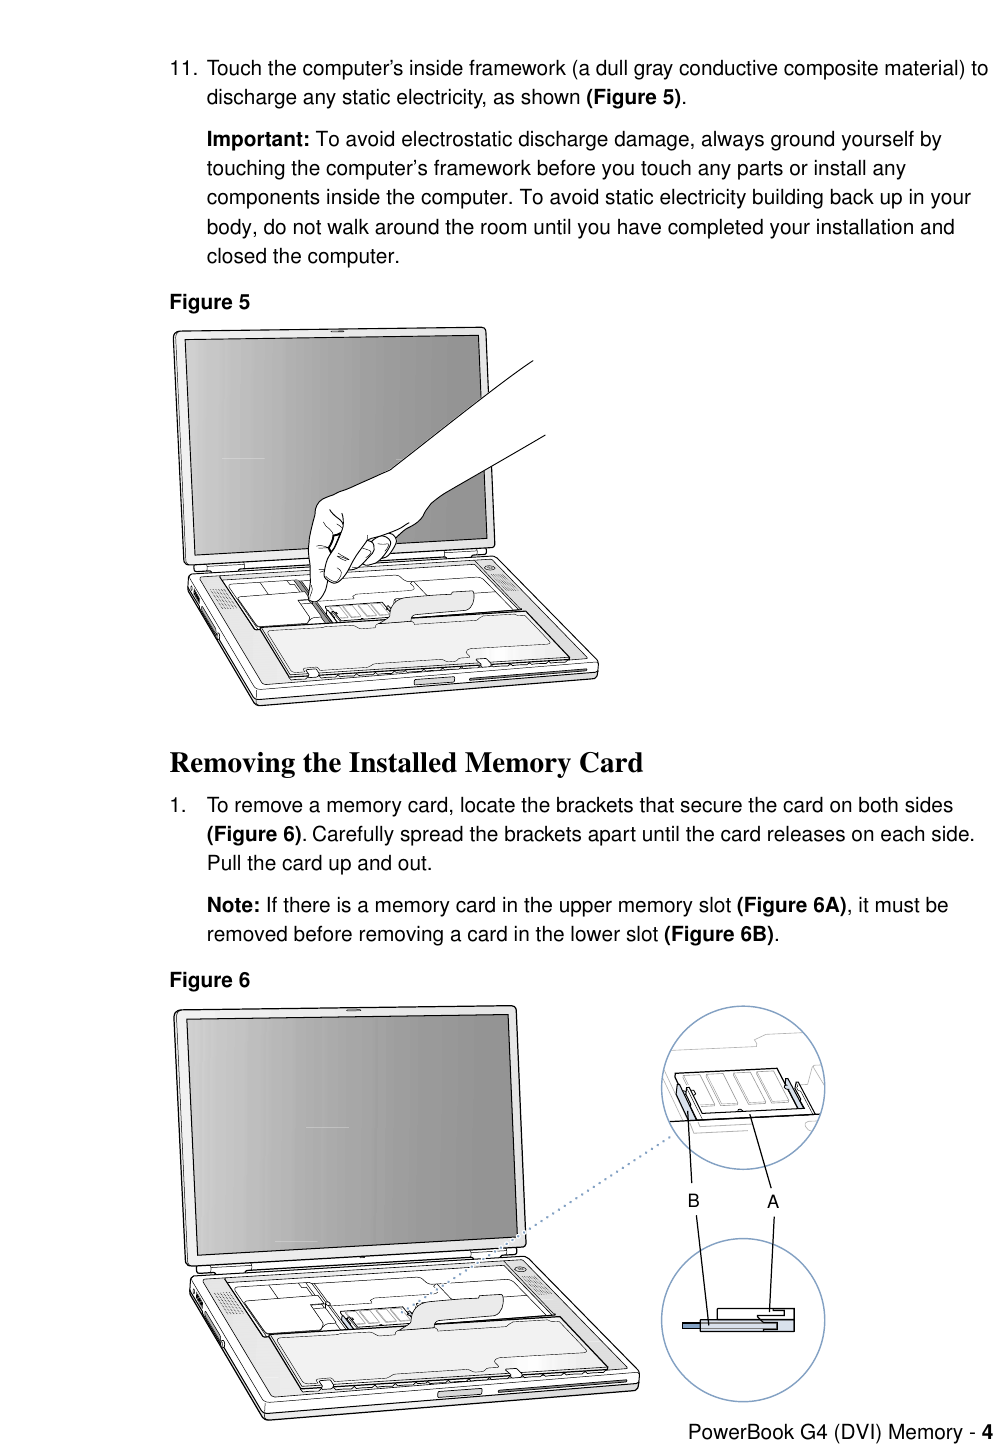 Page 4 of 7 - Apple PowerBook G4 (DVI) User Manual Power Book And (1GHz/867MHz) - Memory Card Replacement Instructions Pbg4dvi-mem-cip